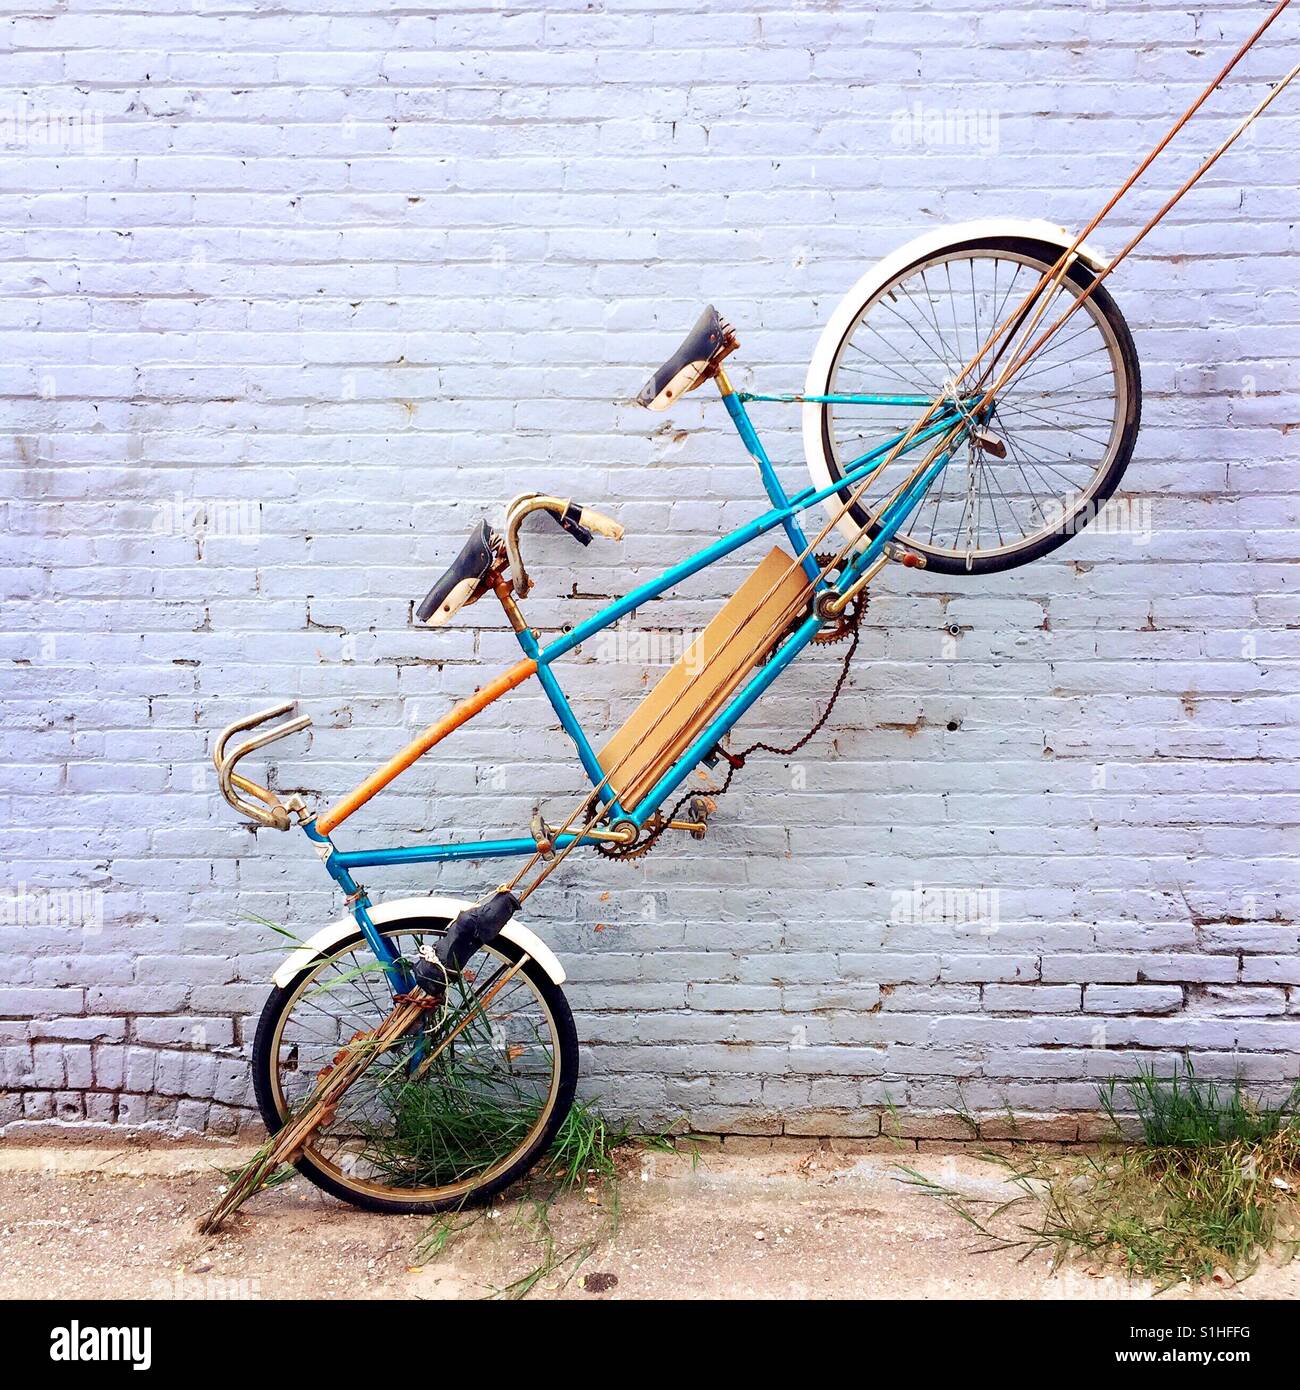 And old dilapidated tandem bicycle displayed on a brick wall Stock Photo